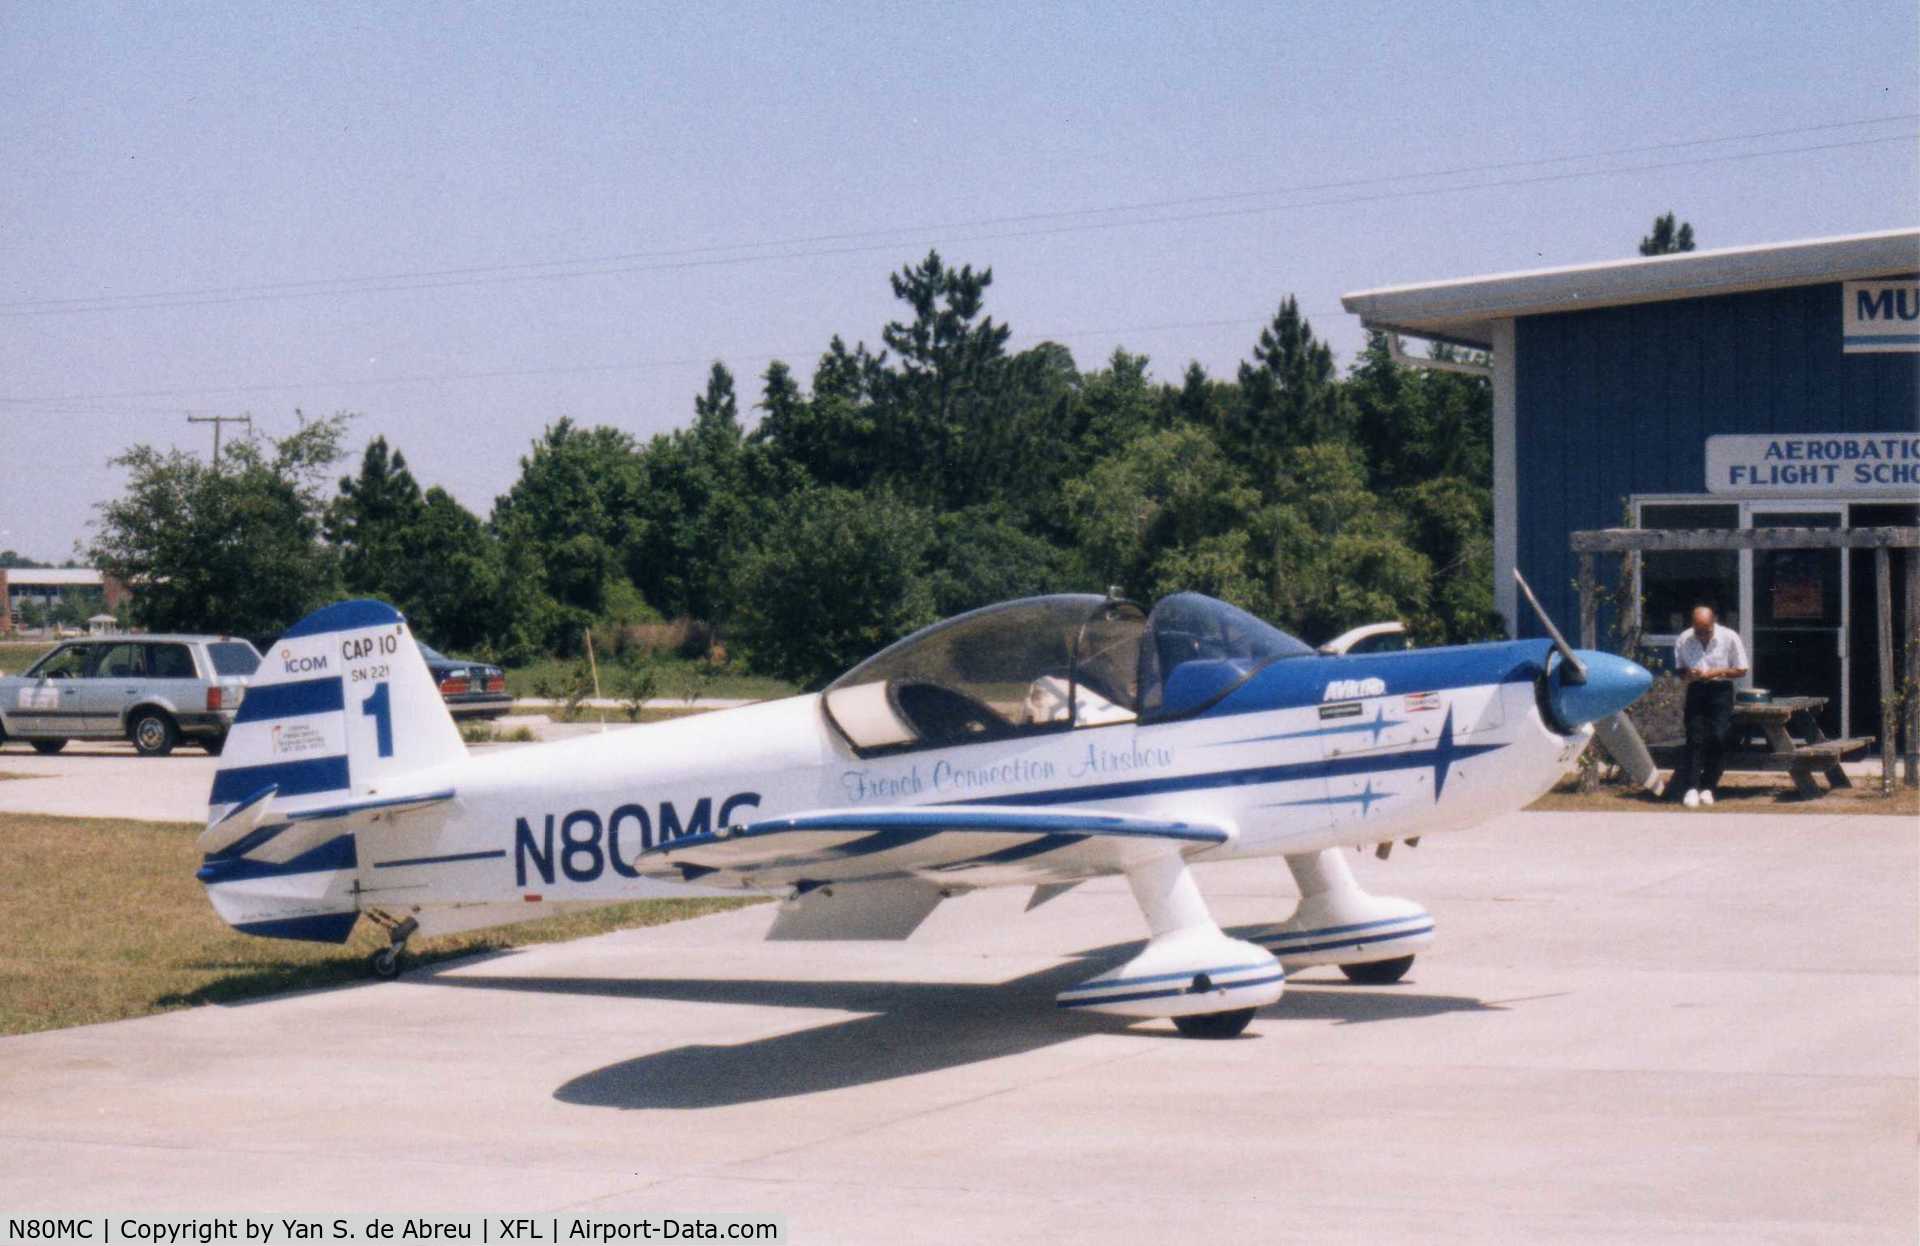 N80MC, Mudry CAP-10B C/N 221, At this time operated by Mudry Aviation.